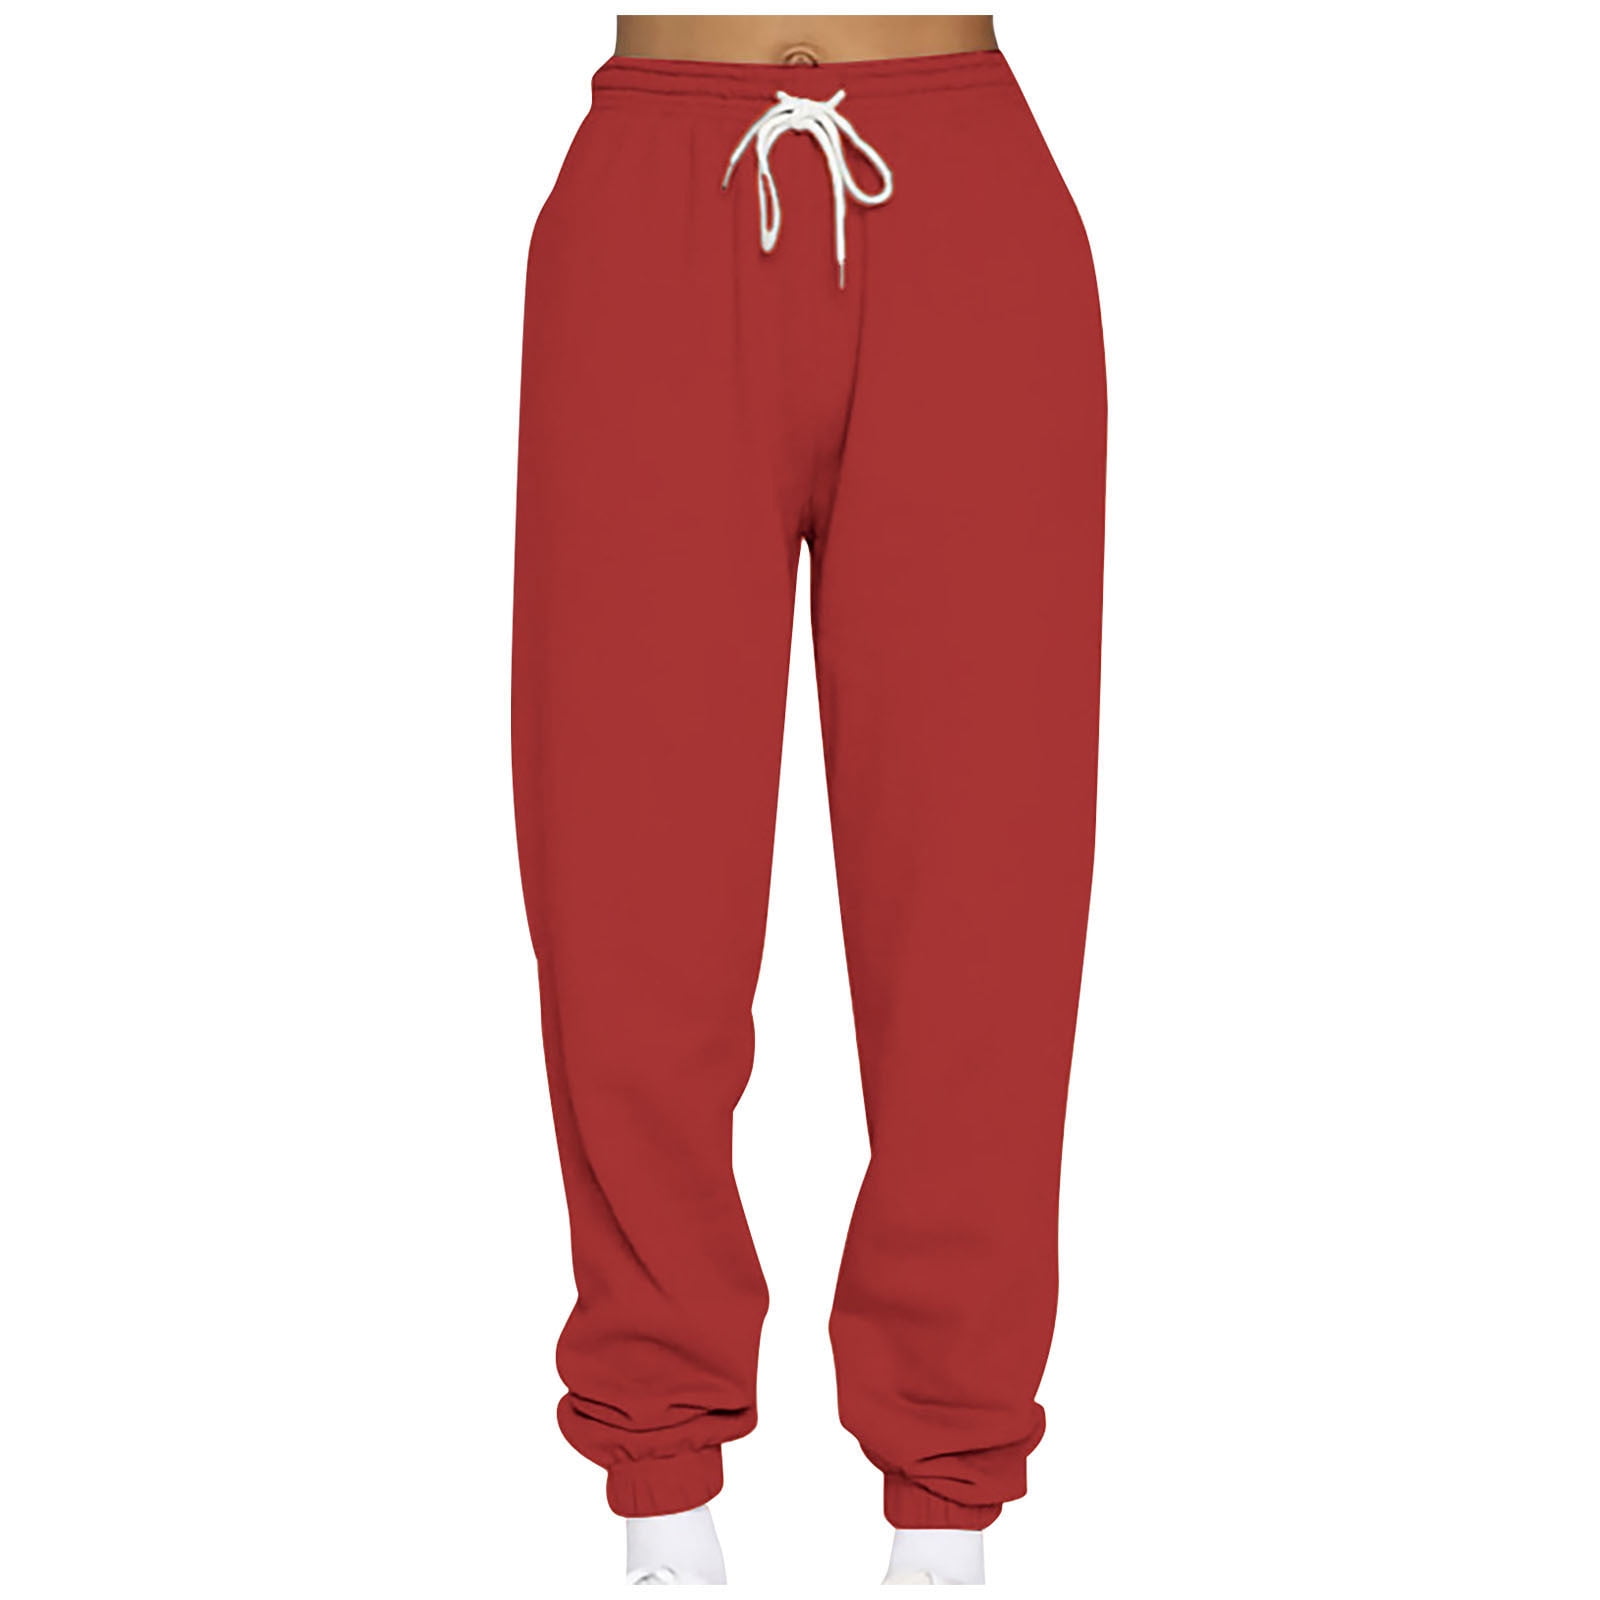 XFLWAM Women's High Waisted Sweatpants Baggy Fleece Lined Lounge Pants  Comfy Wide Leg Drawstring Joggers with Pockets Red L 